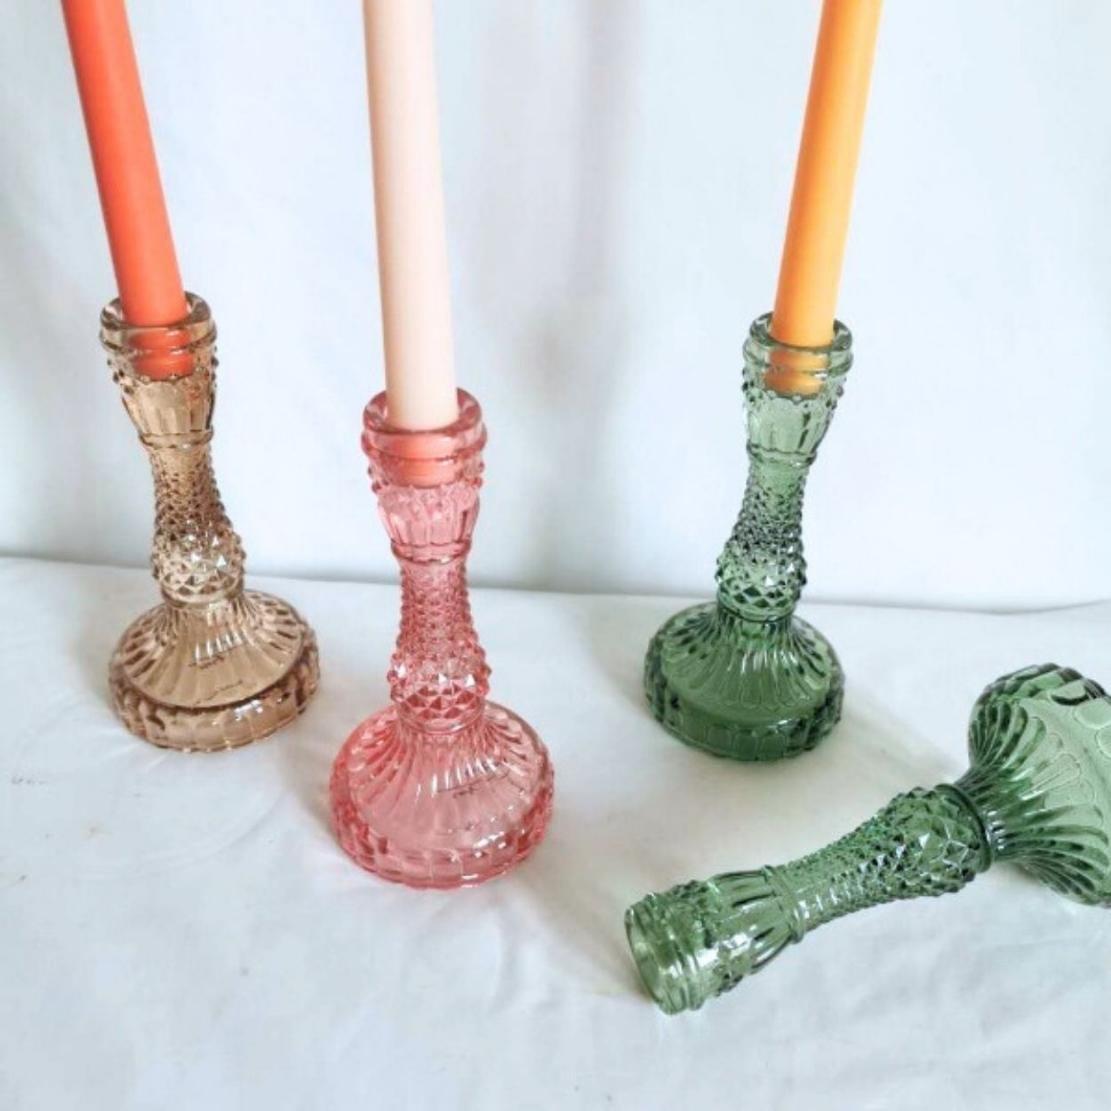 Brown, pink & green romantic glass candleholders